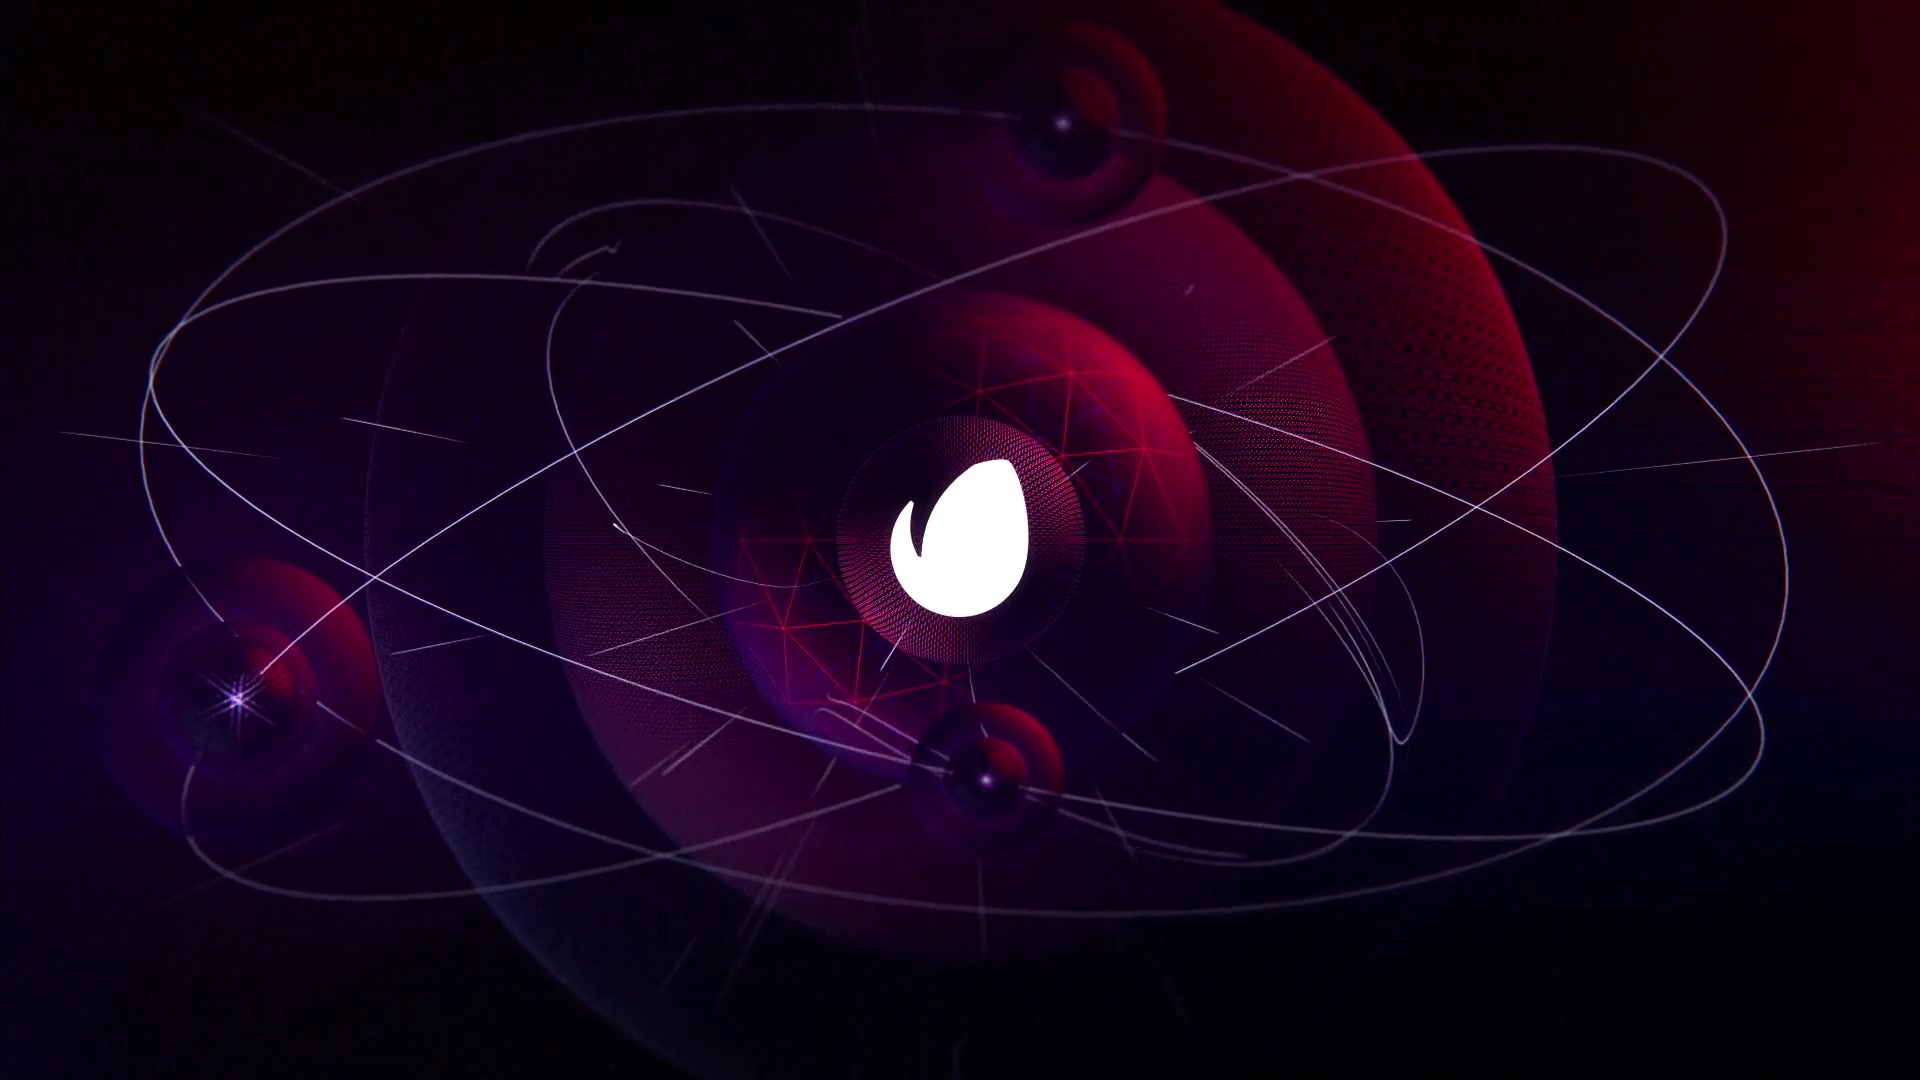 sphere logo after effects templates free download zip